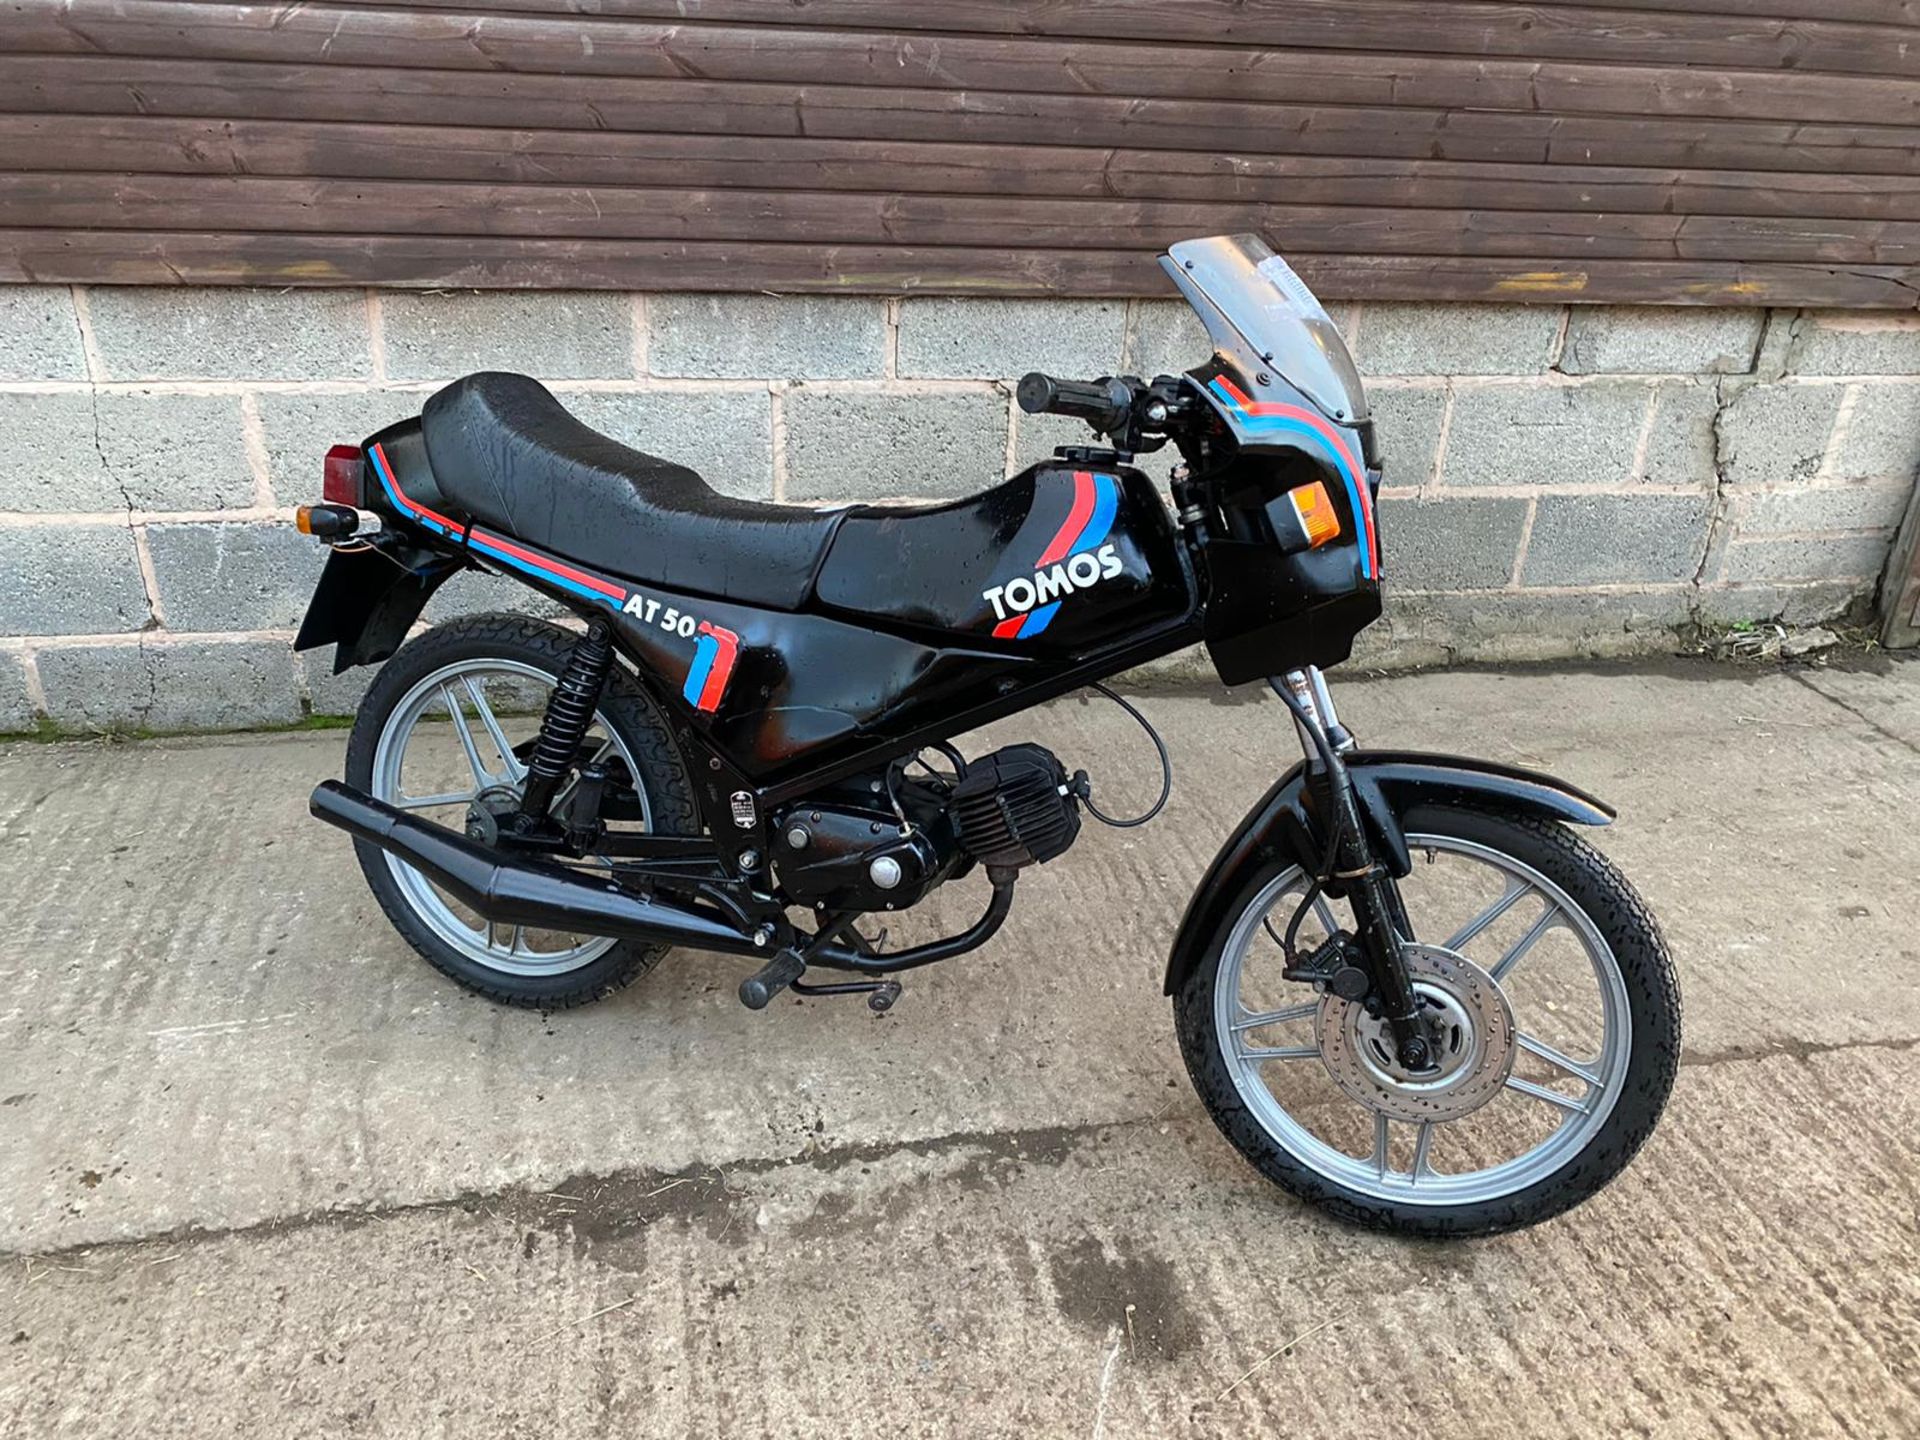 1989 TOMOS 50 CC CLASSIC MOPED LOCATION CO DURHAM - Image 5 of 5